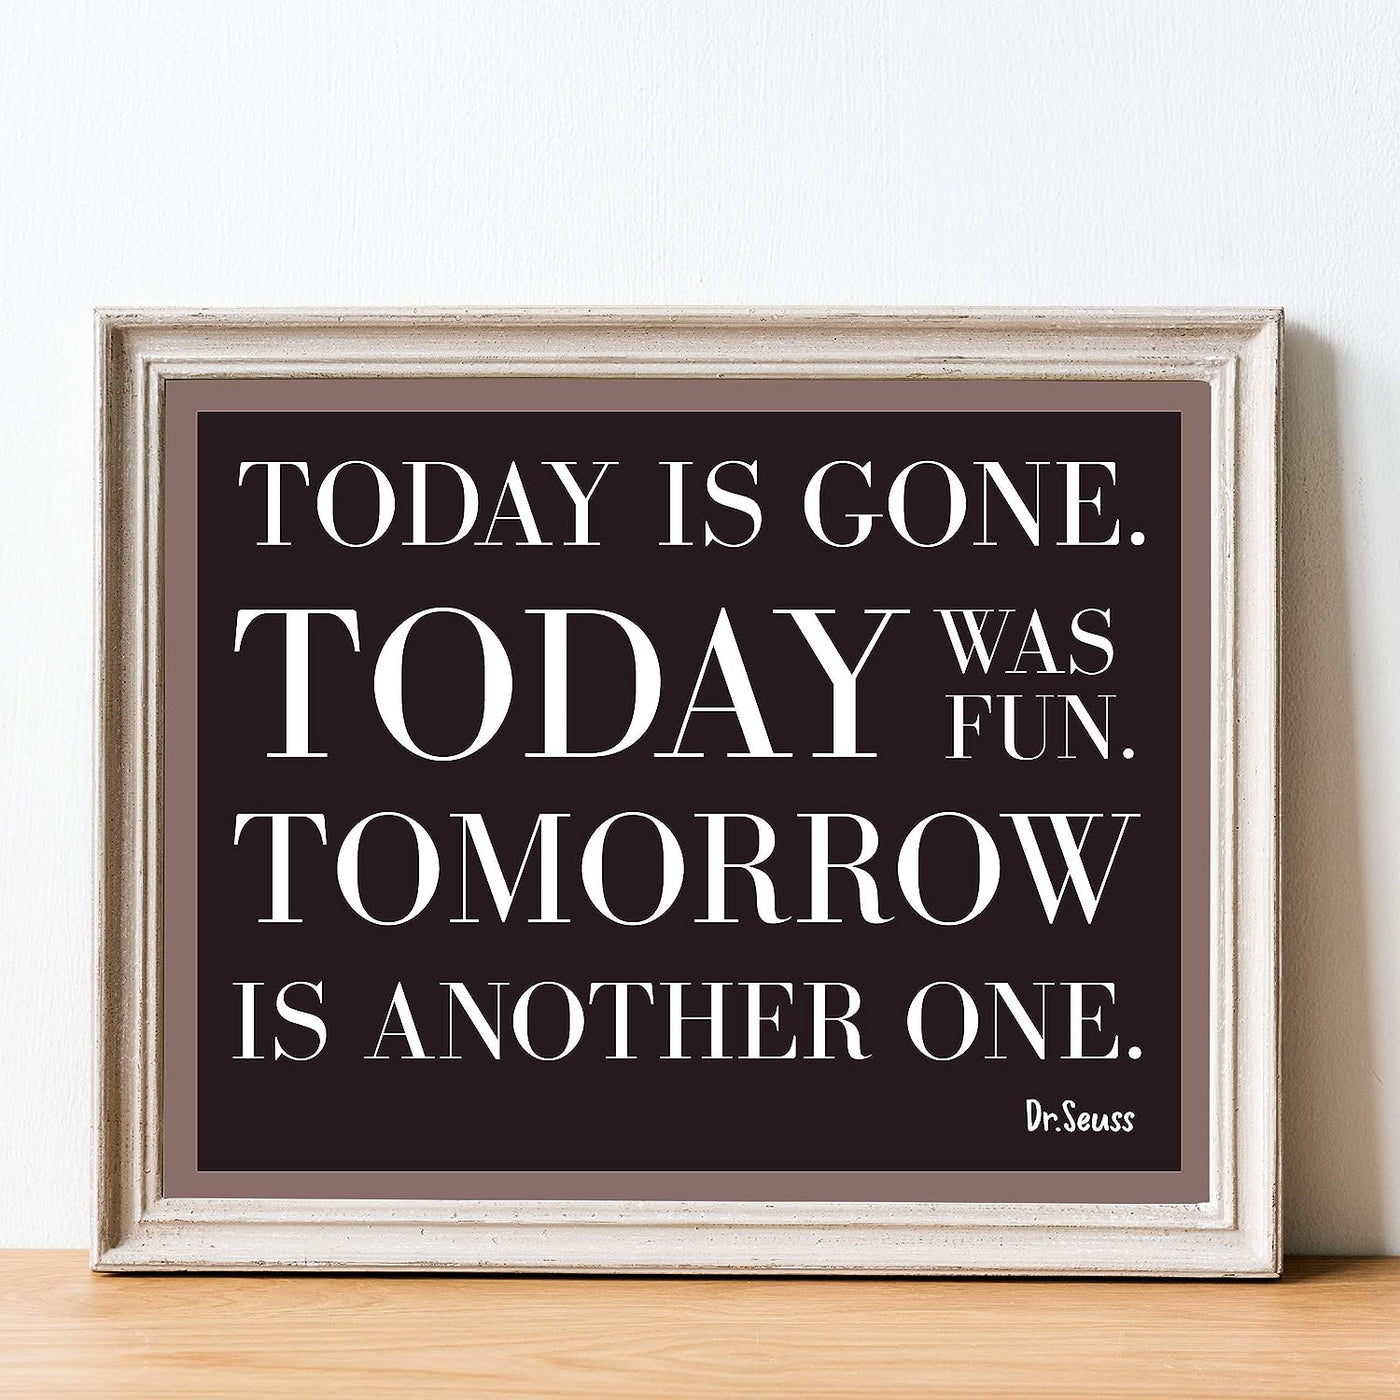 Today Is Gone-Today Was Fun-Dr. Seuss Quote -14 x 11" Art Wall Print- Ready to Frame. Modern Typographic Design. Home-Nursery-Office-School-Library Decor. Perfect Gift for Parents and Teachers!